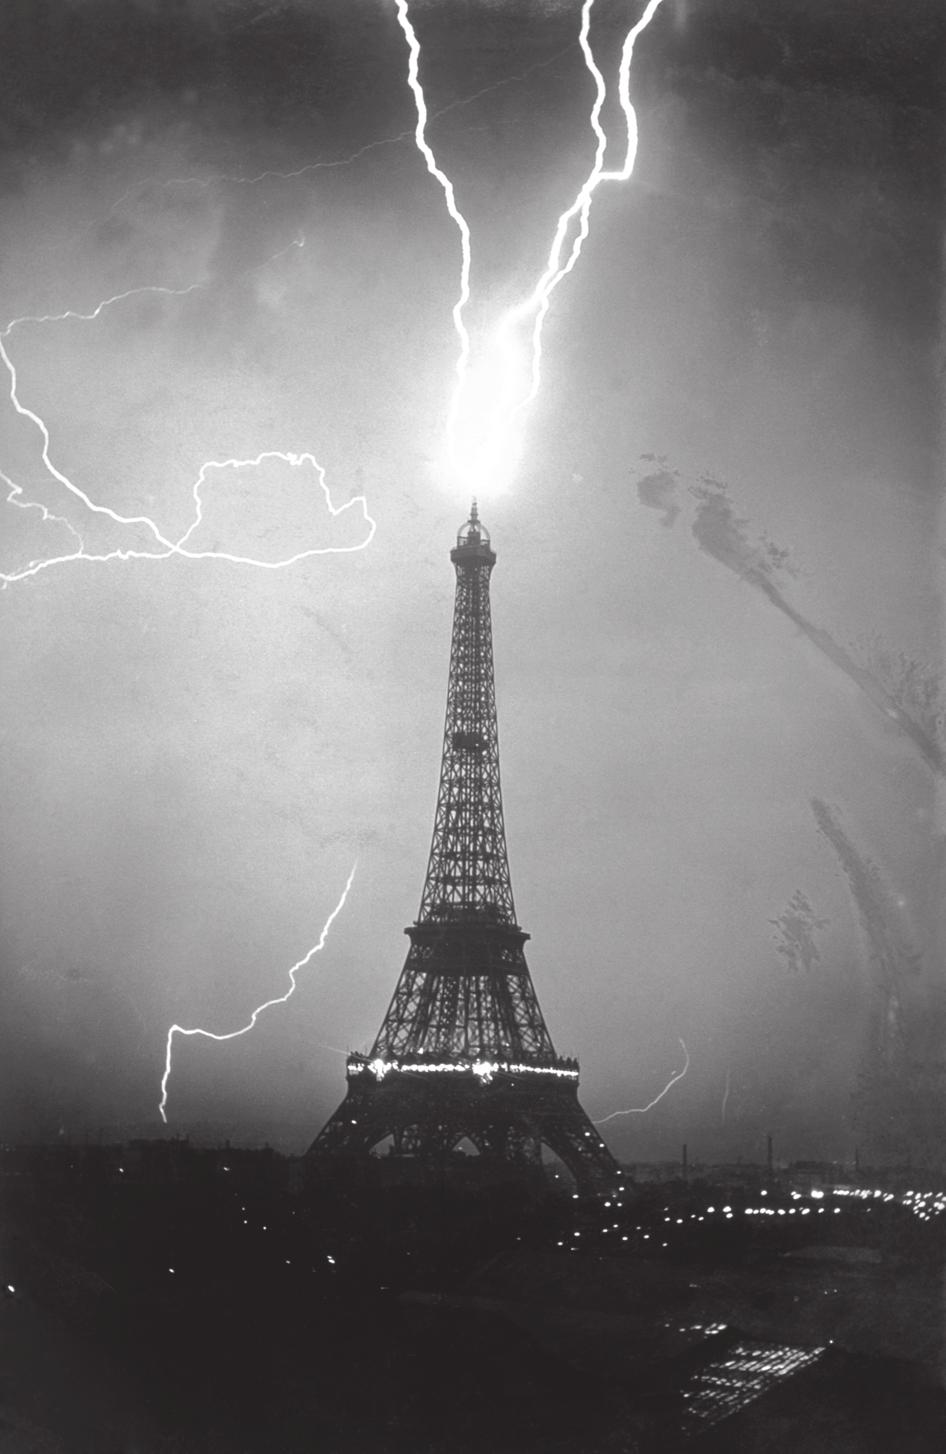 10 6 During a thunderstorm lightning strikes the Eiffel Tower. In lightning the temperature can reach 30 000 C. This causes nitrogen and oxygen in the air to react, producing nitrogen oxide.